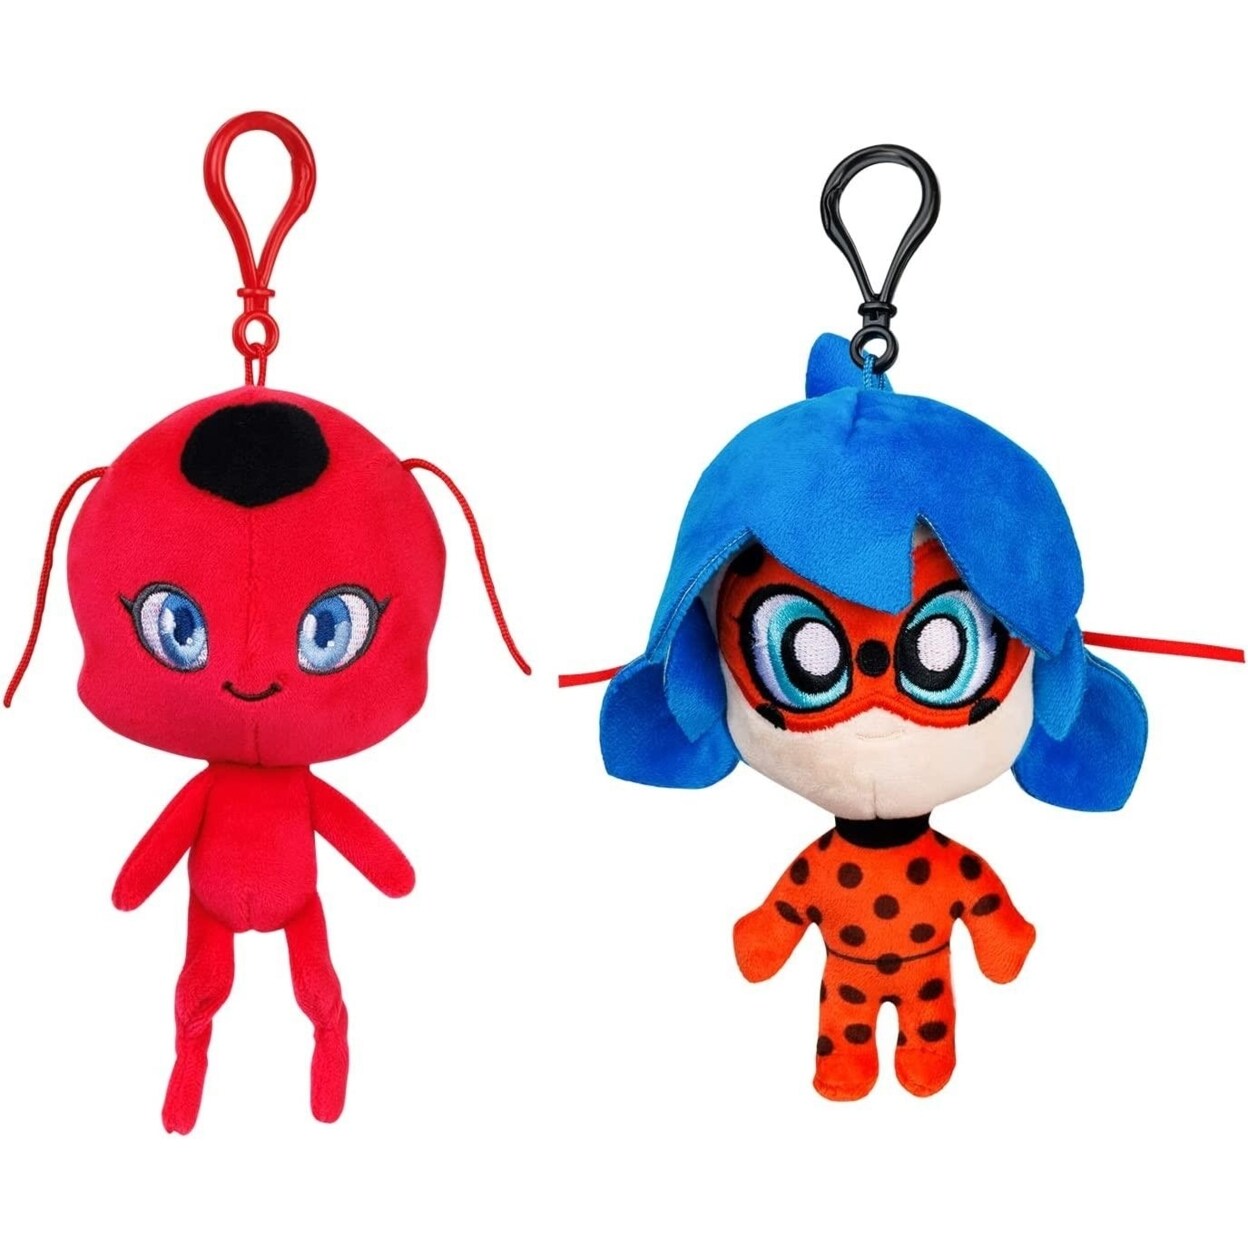 Miraculous Ladybug schoolbag: how to make the right choice?